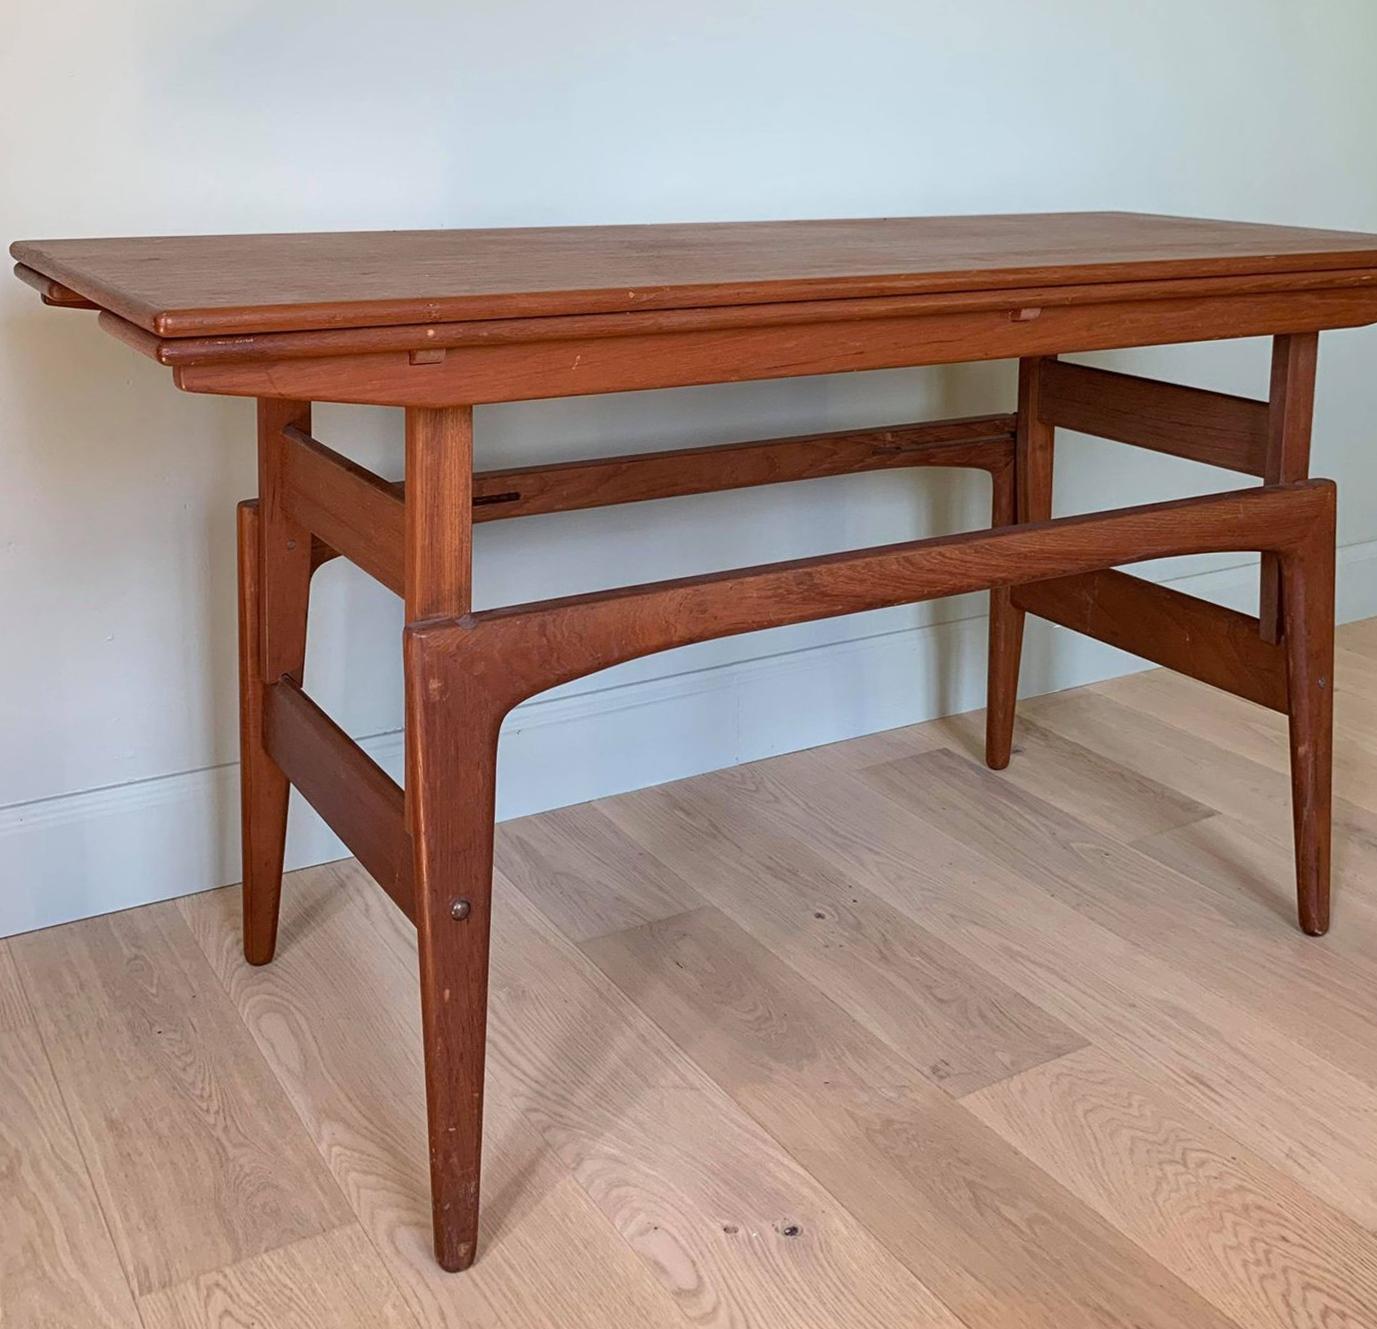 Mid-century 3 fonctions table/console/coffee table model ''Rio'' by Kai Kristiansen - Denmark 1960s
Dimensions :
Coffee table (open) : 90 x 135 H. 54cm
Coffee table (closed) : 54 x 90 H. 54 cm
Dining table (open) : 90 x 135 H. 72 cm
Console 54